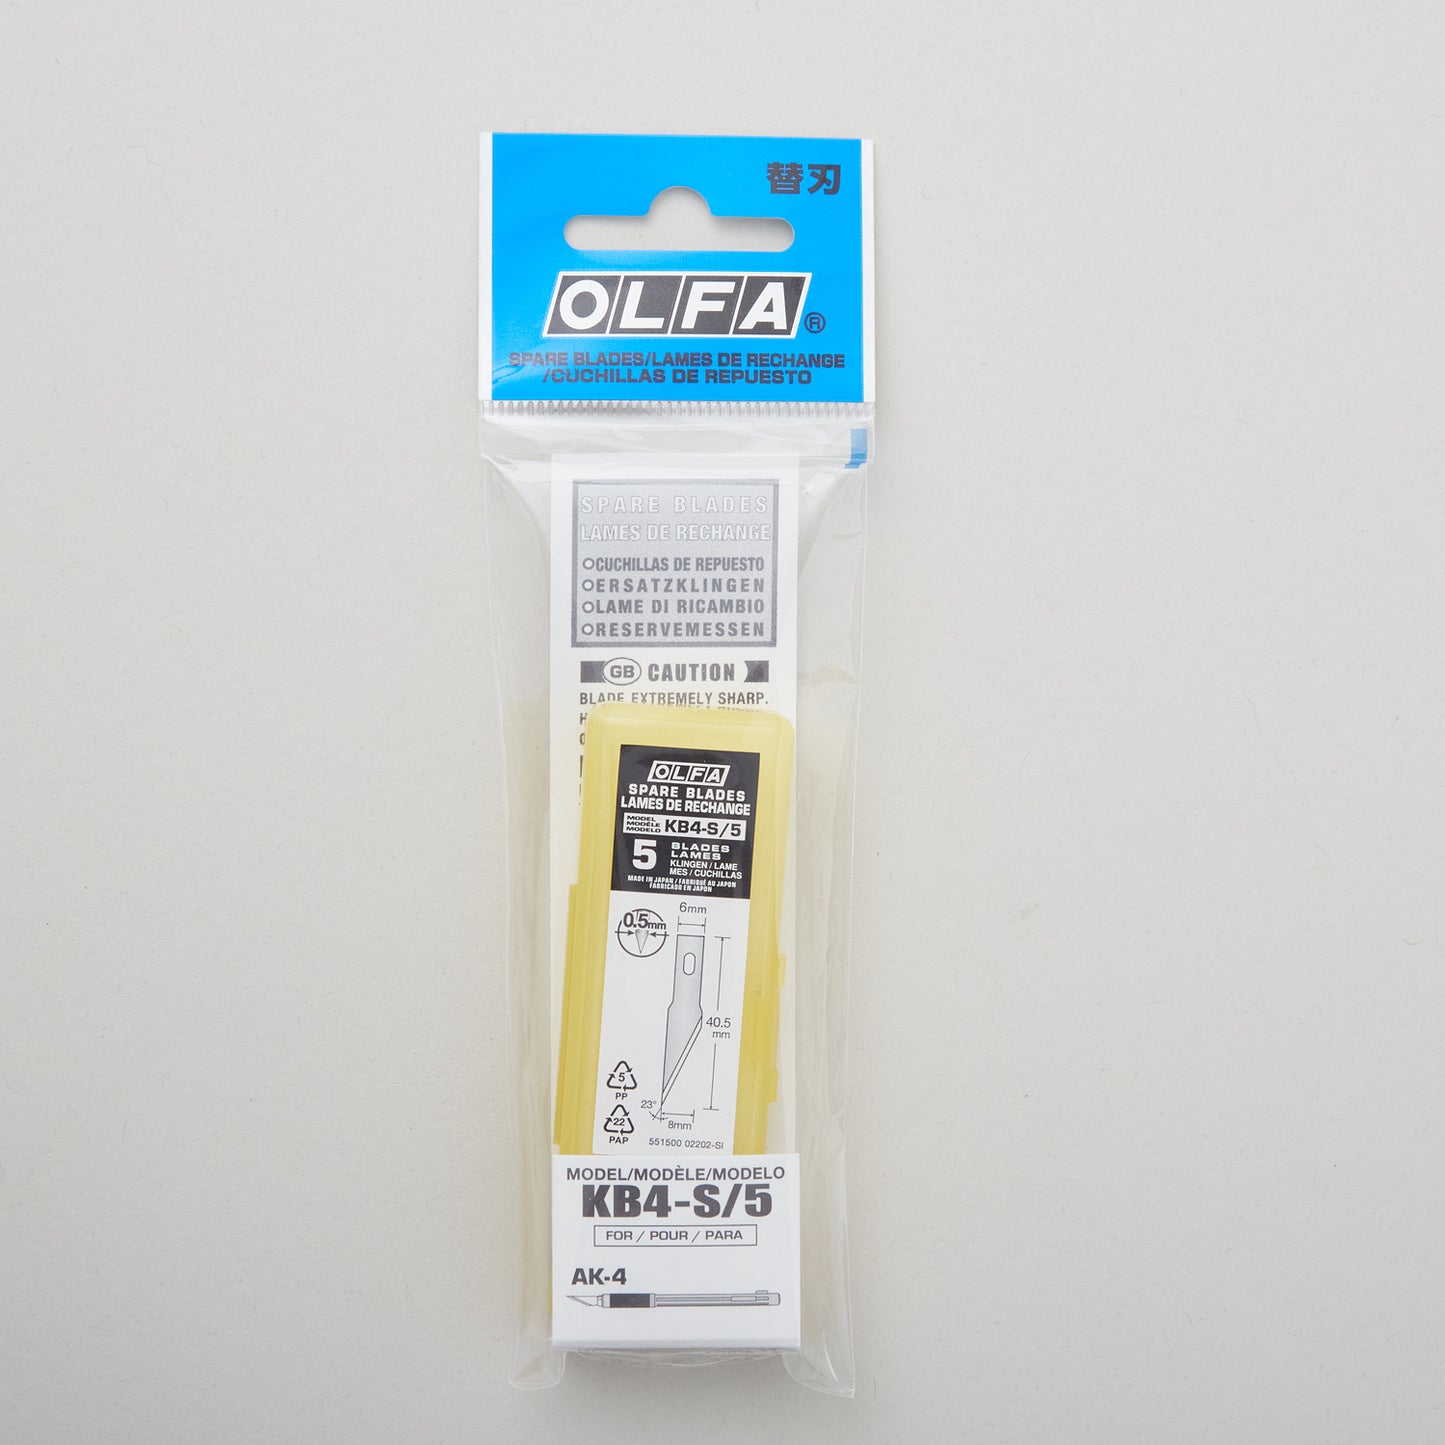 Olfa Craft Knife Replacement Blades - 5 Pack Alternative View #2